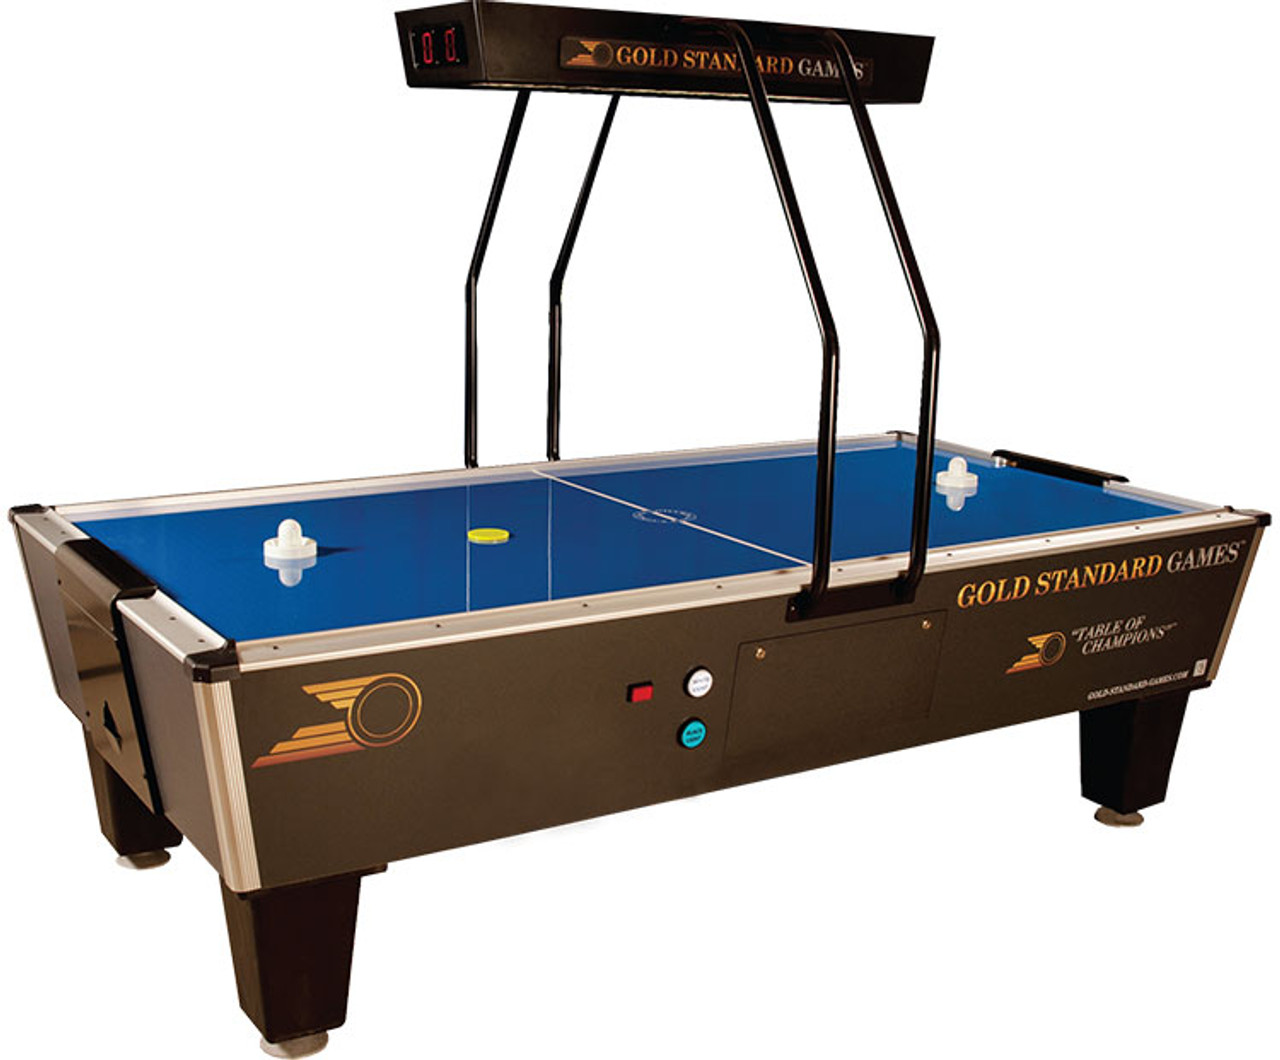 Gold Standard Games Tournament Pro Elite Air Hockey Table on a white background